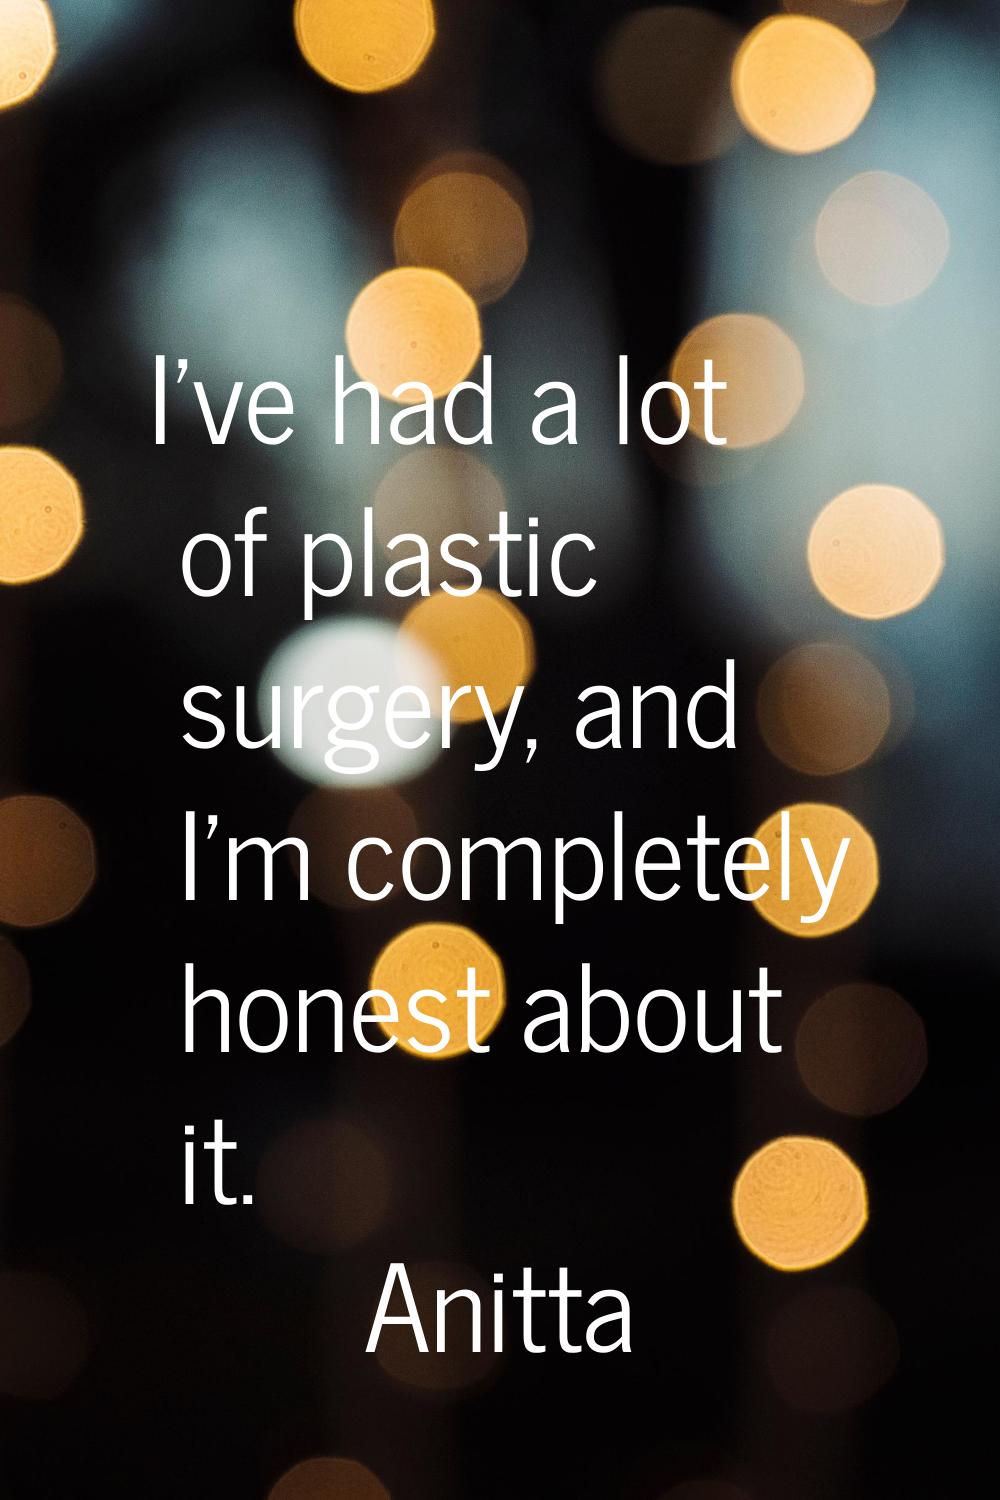 I've had a lot of plastic surgery, and I'm completely honest about it.